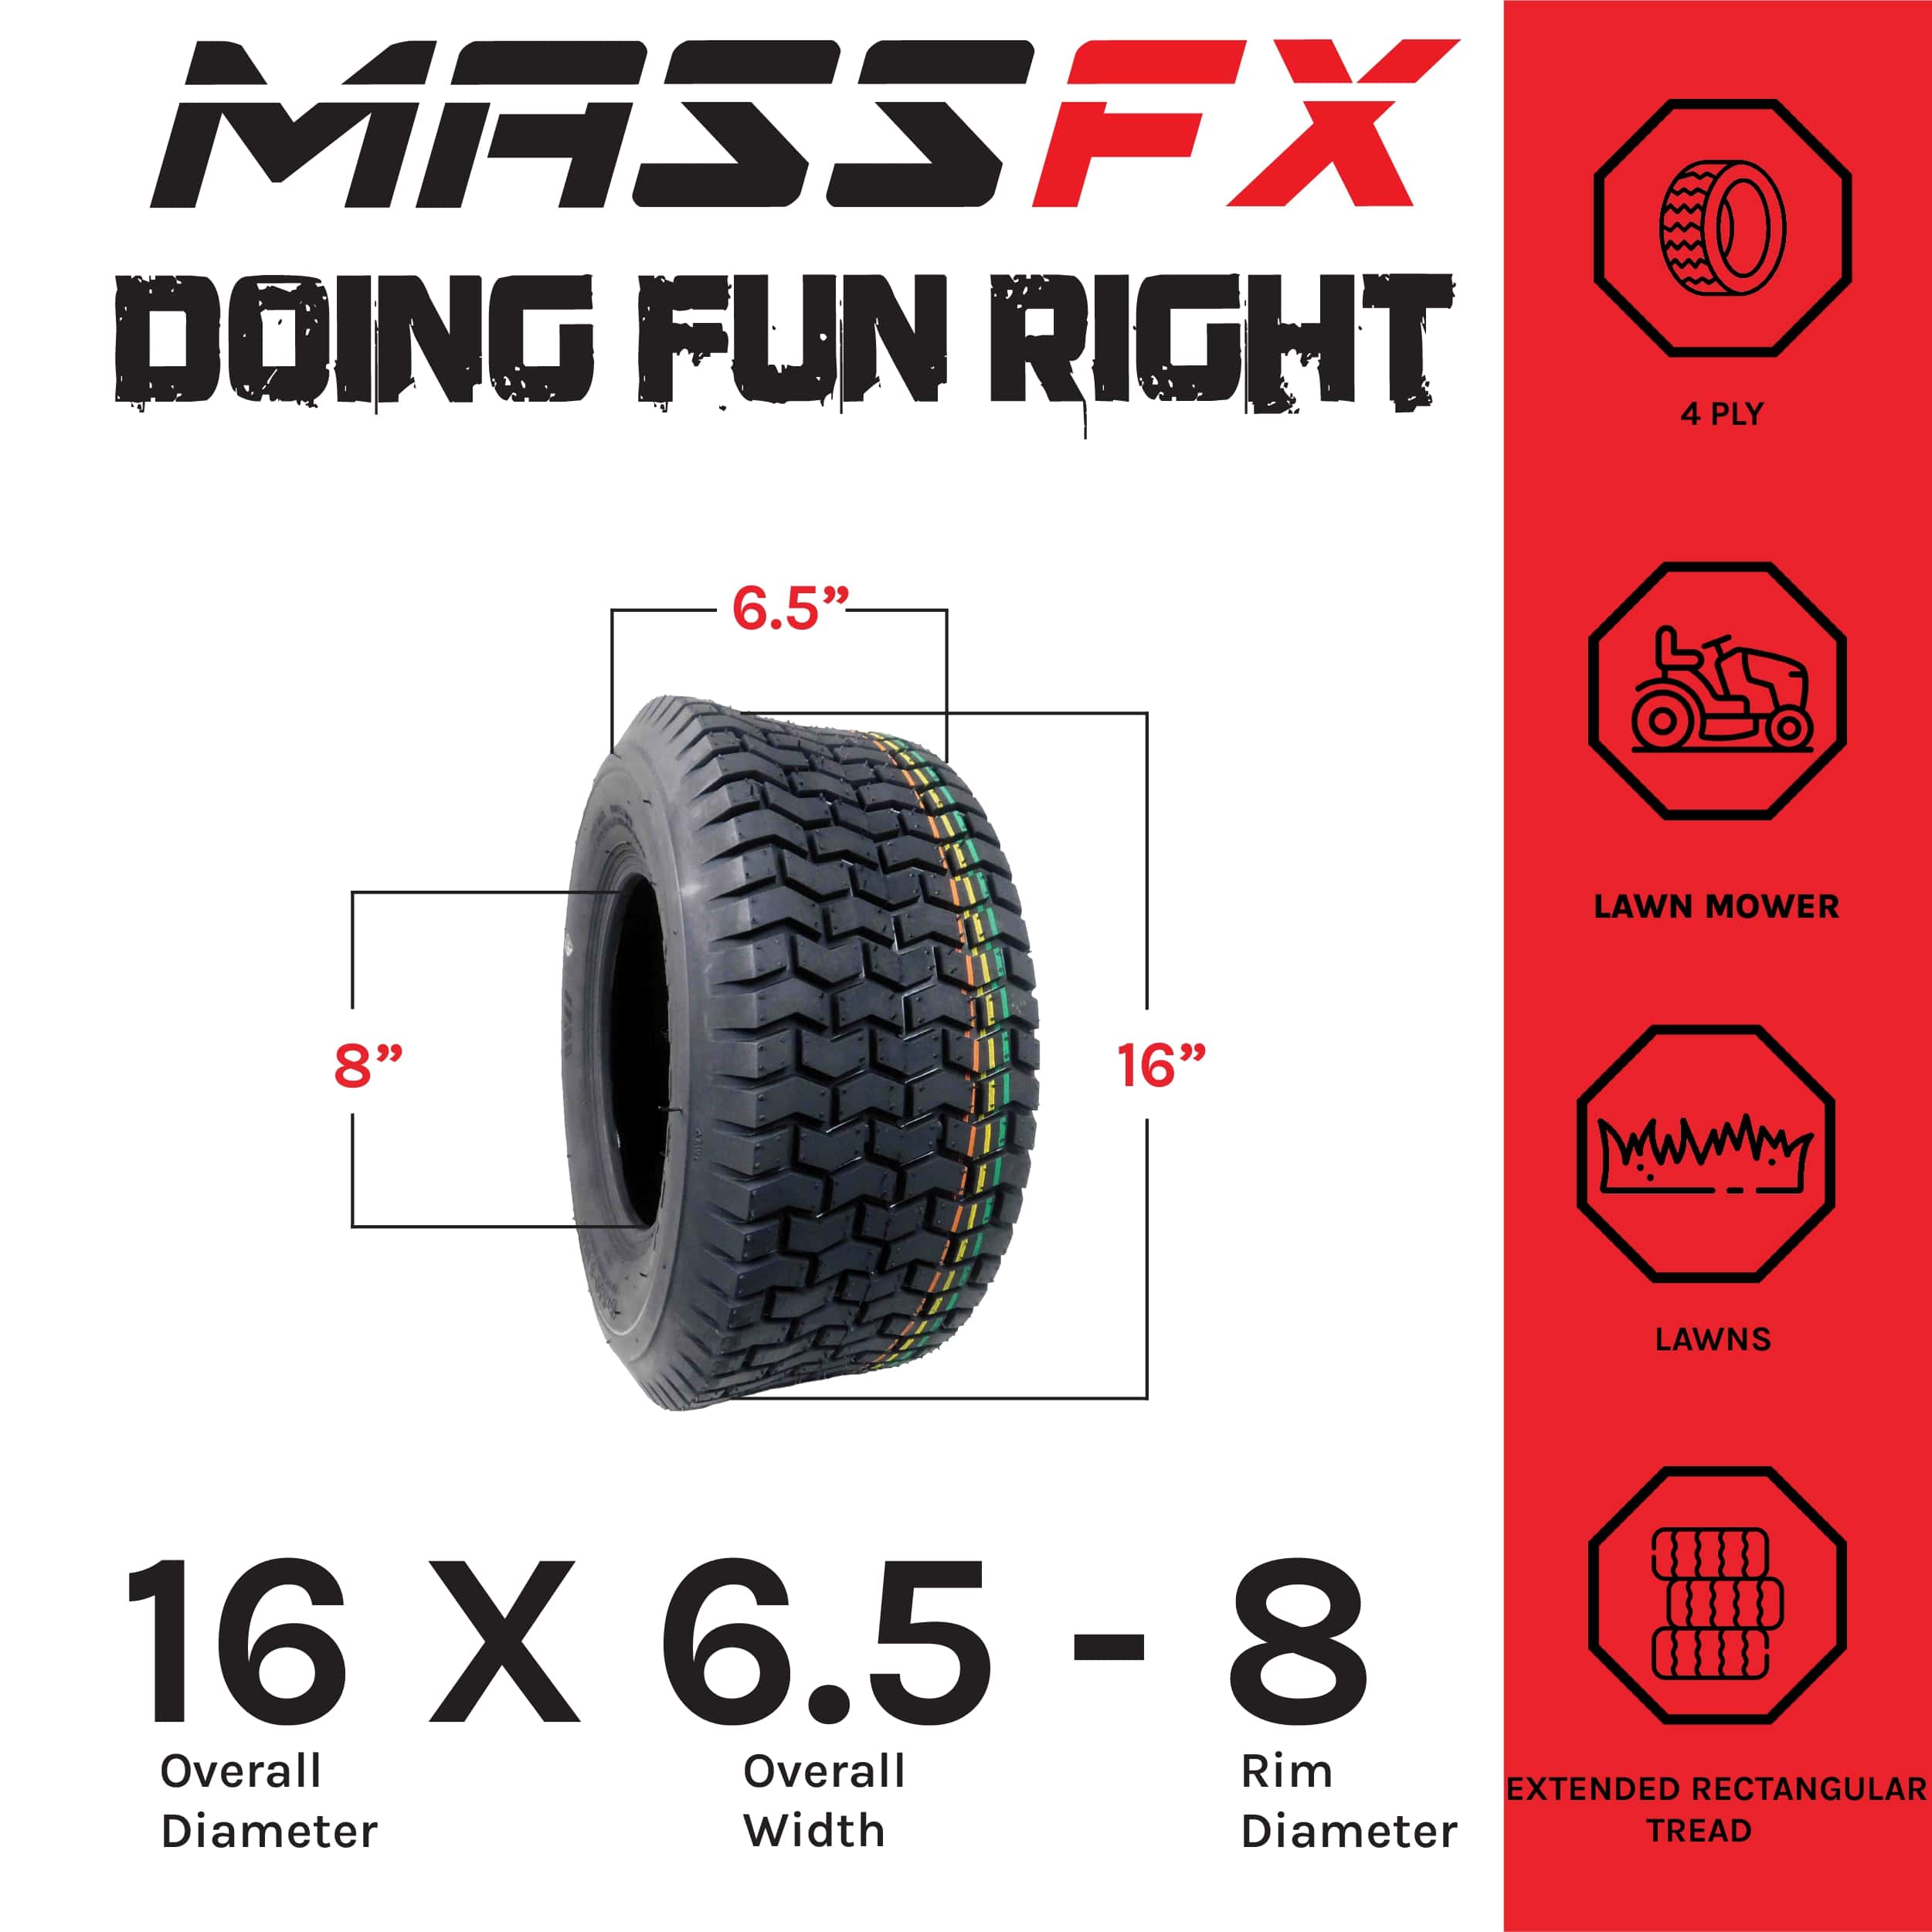 MASSFX 16x6.5-8 Lawn & Garden, Lawn Mower & Tractor Tires 4 Ply with 7mm Tread Depth (2 Pack) - image 2 of 9